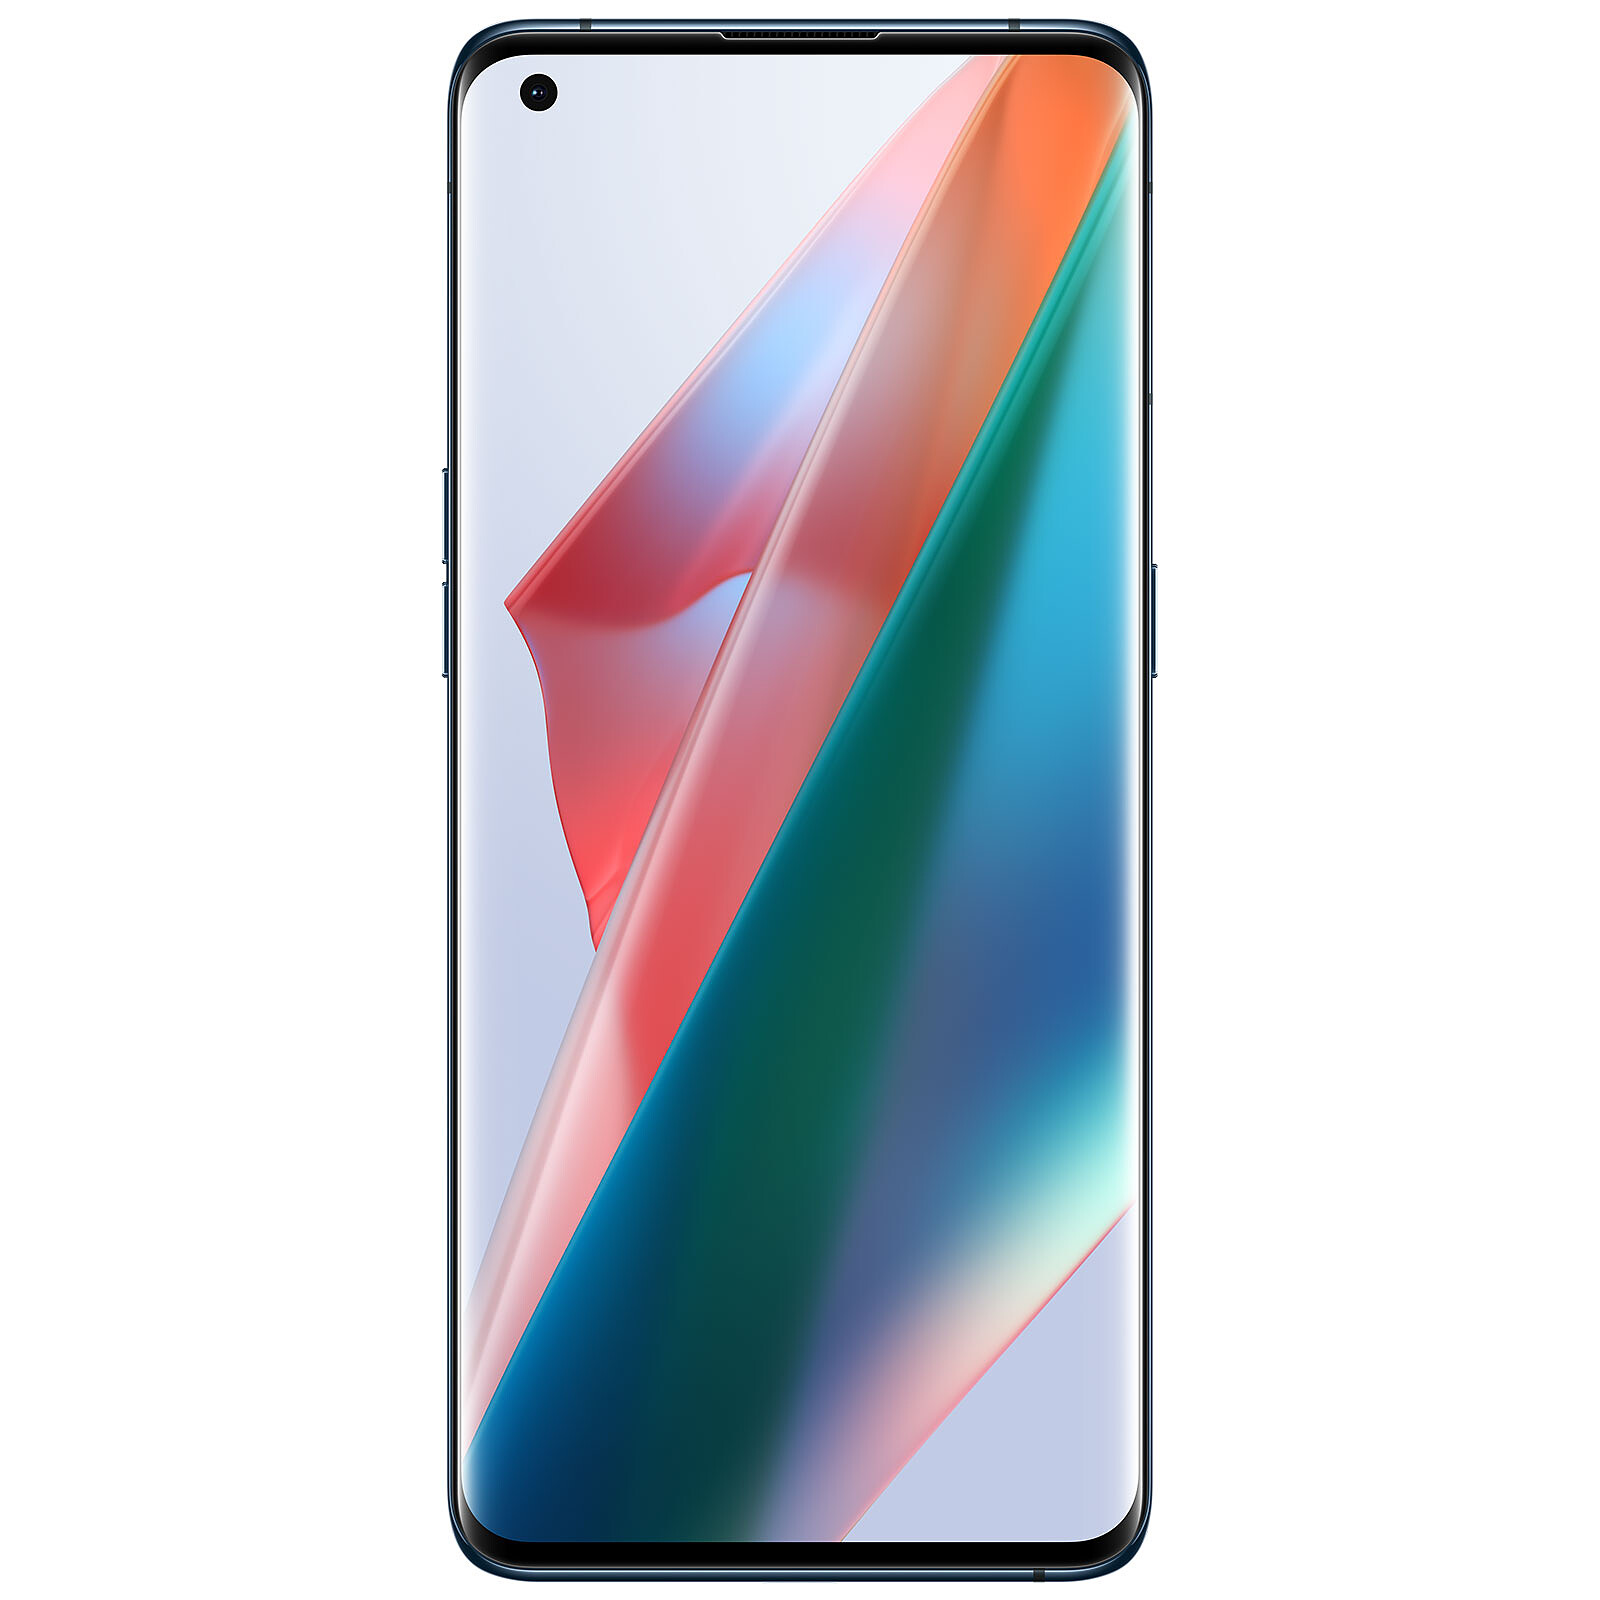 OPPO Find X5 5G Black - Mobile phone & smartphone - LDLC 3-year